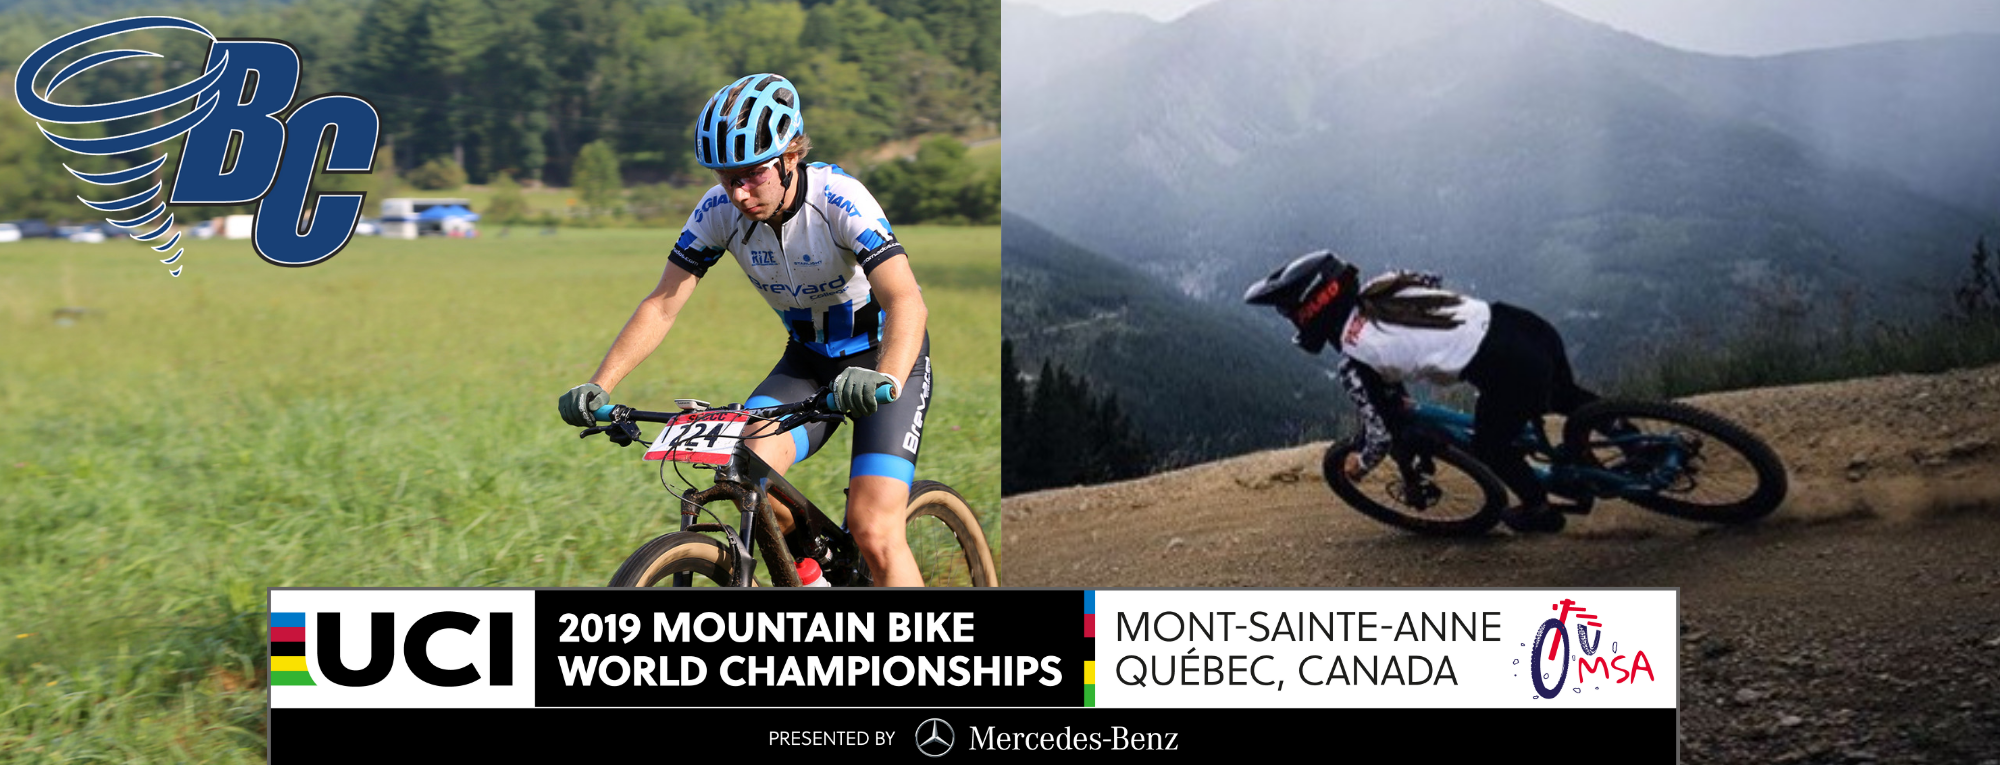 Orschel, Pageau of Brevard College to Compete at Mountain Bike World Championships